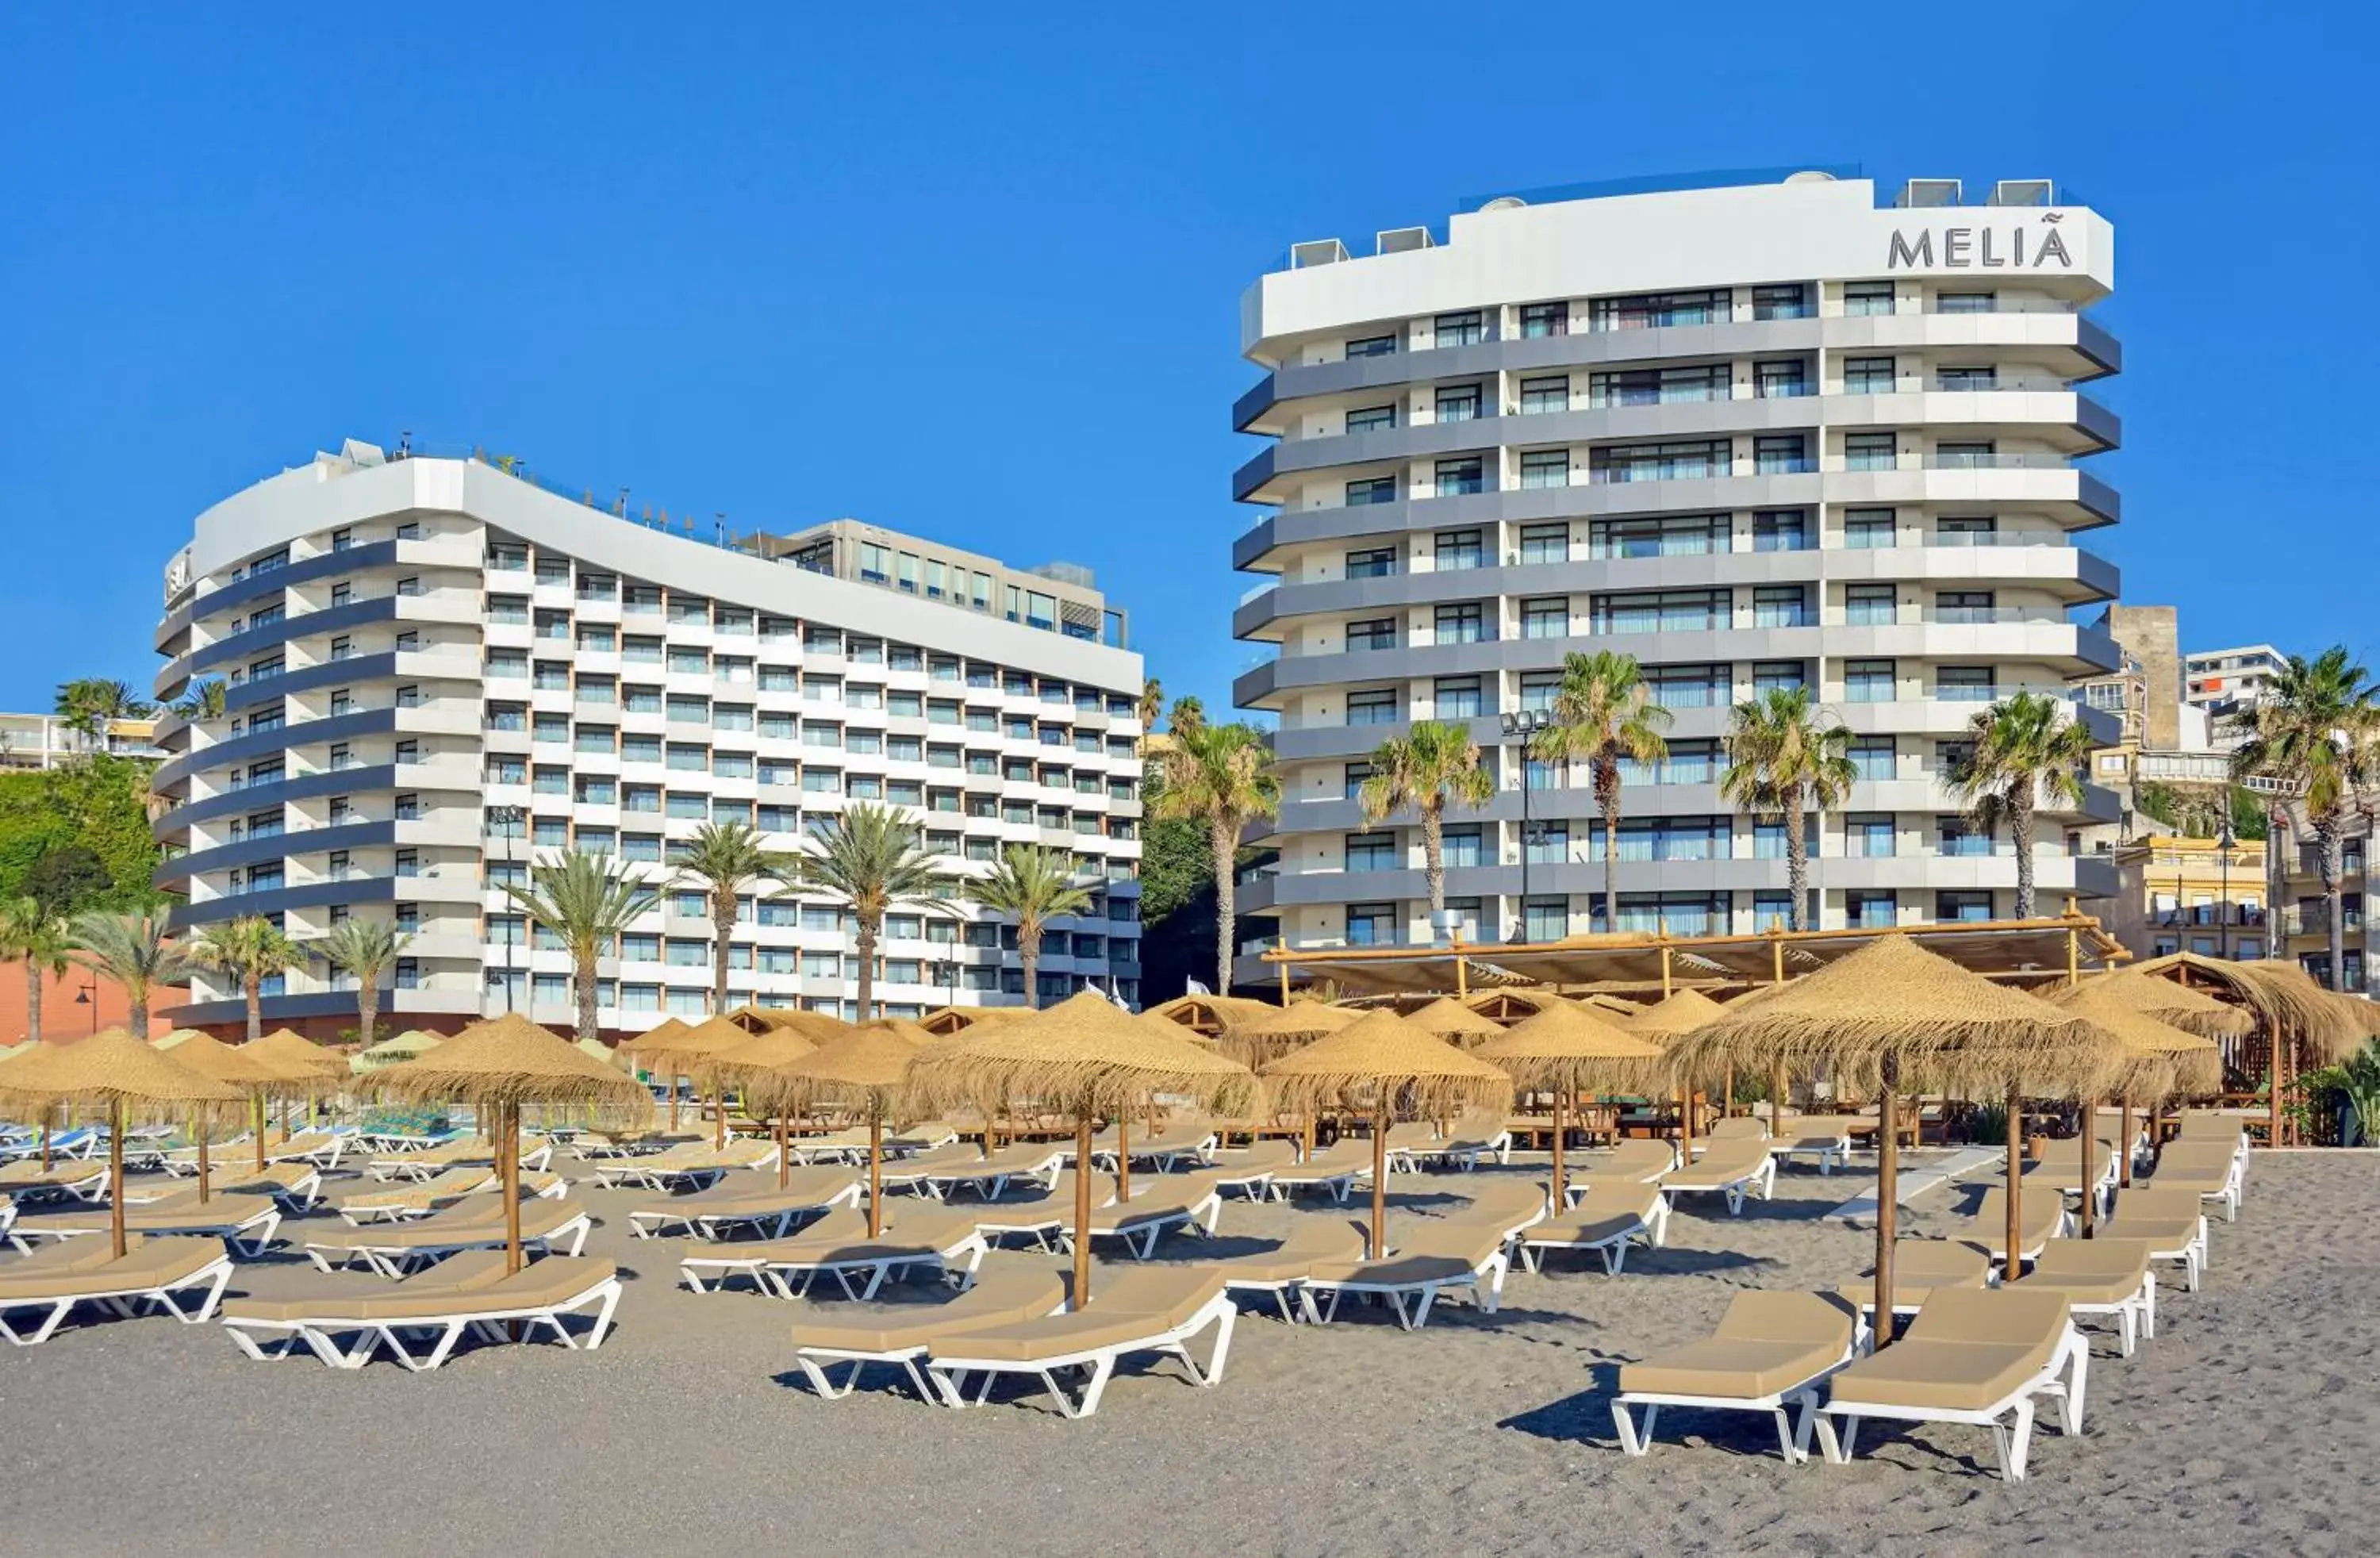 Restaurant/places to eat, Property Building in Melia Costa del Sol